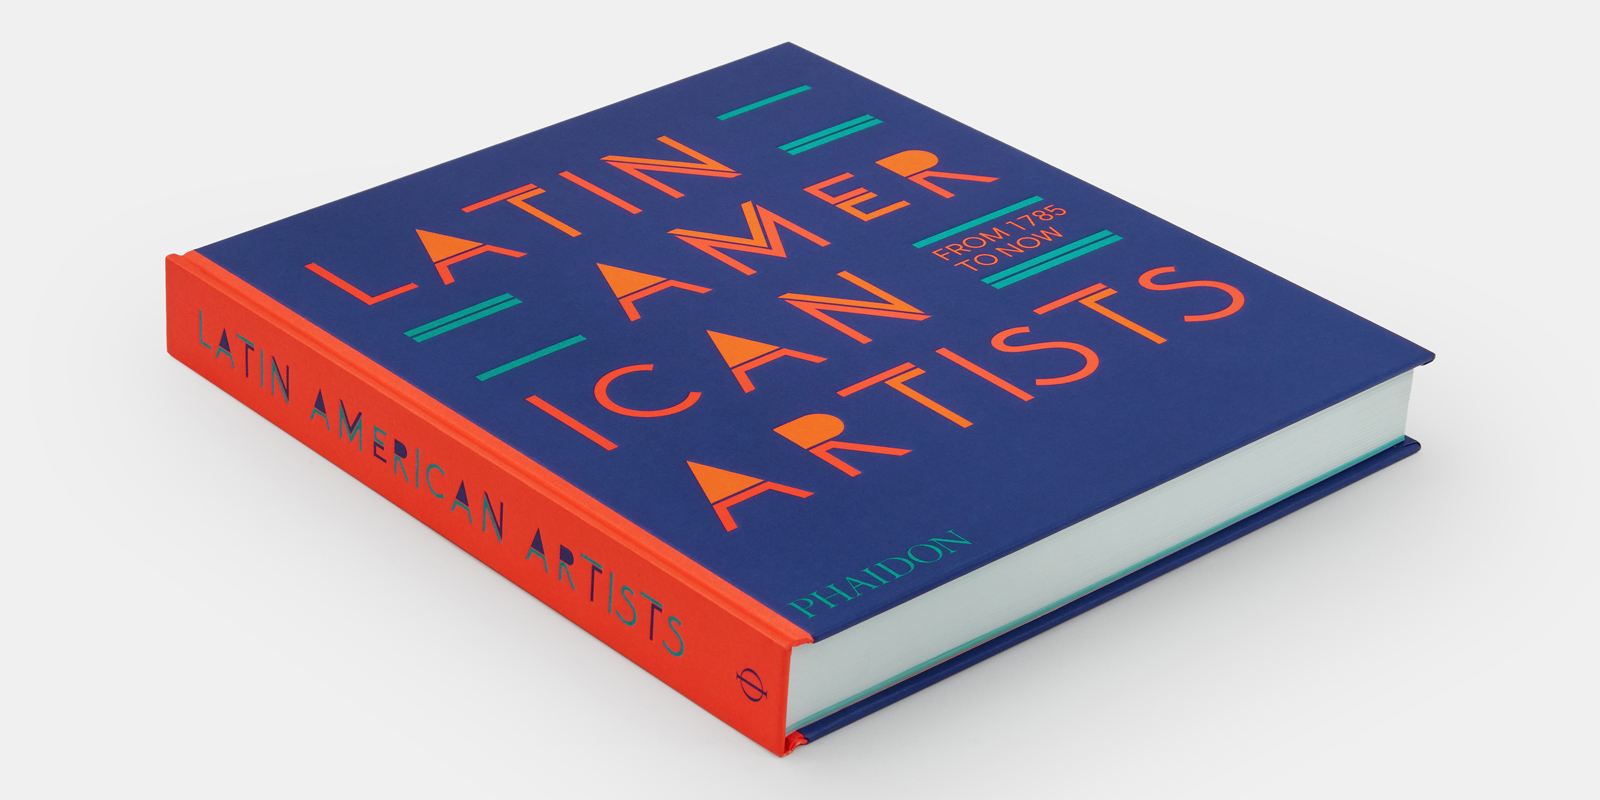 Latin American Artists From 1785 to Now